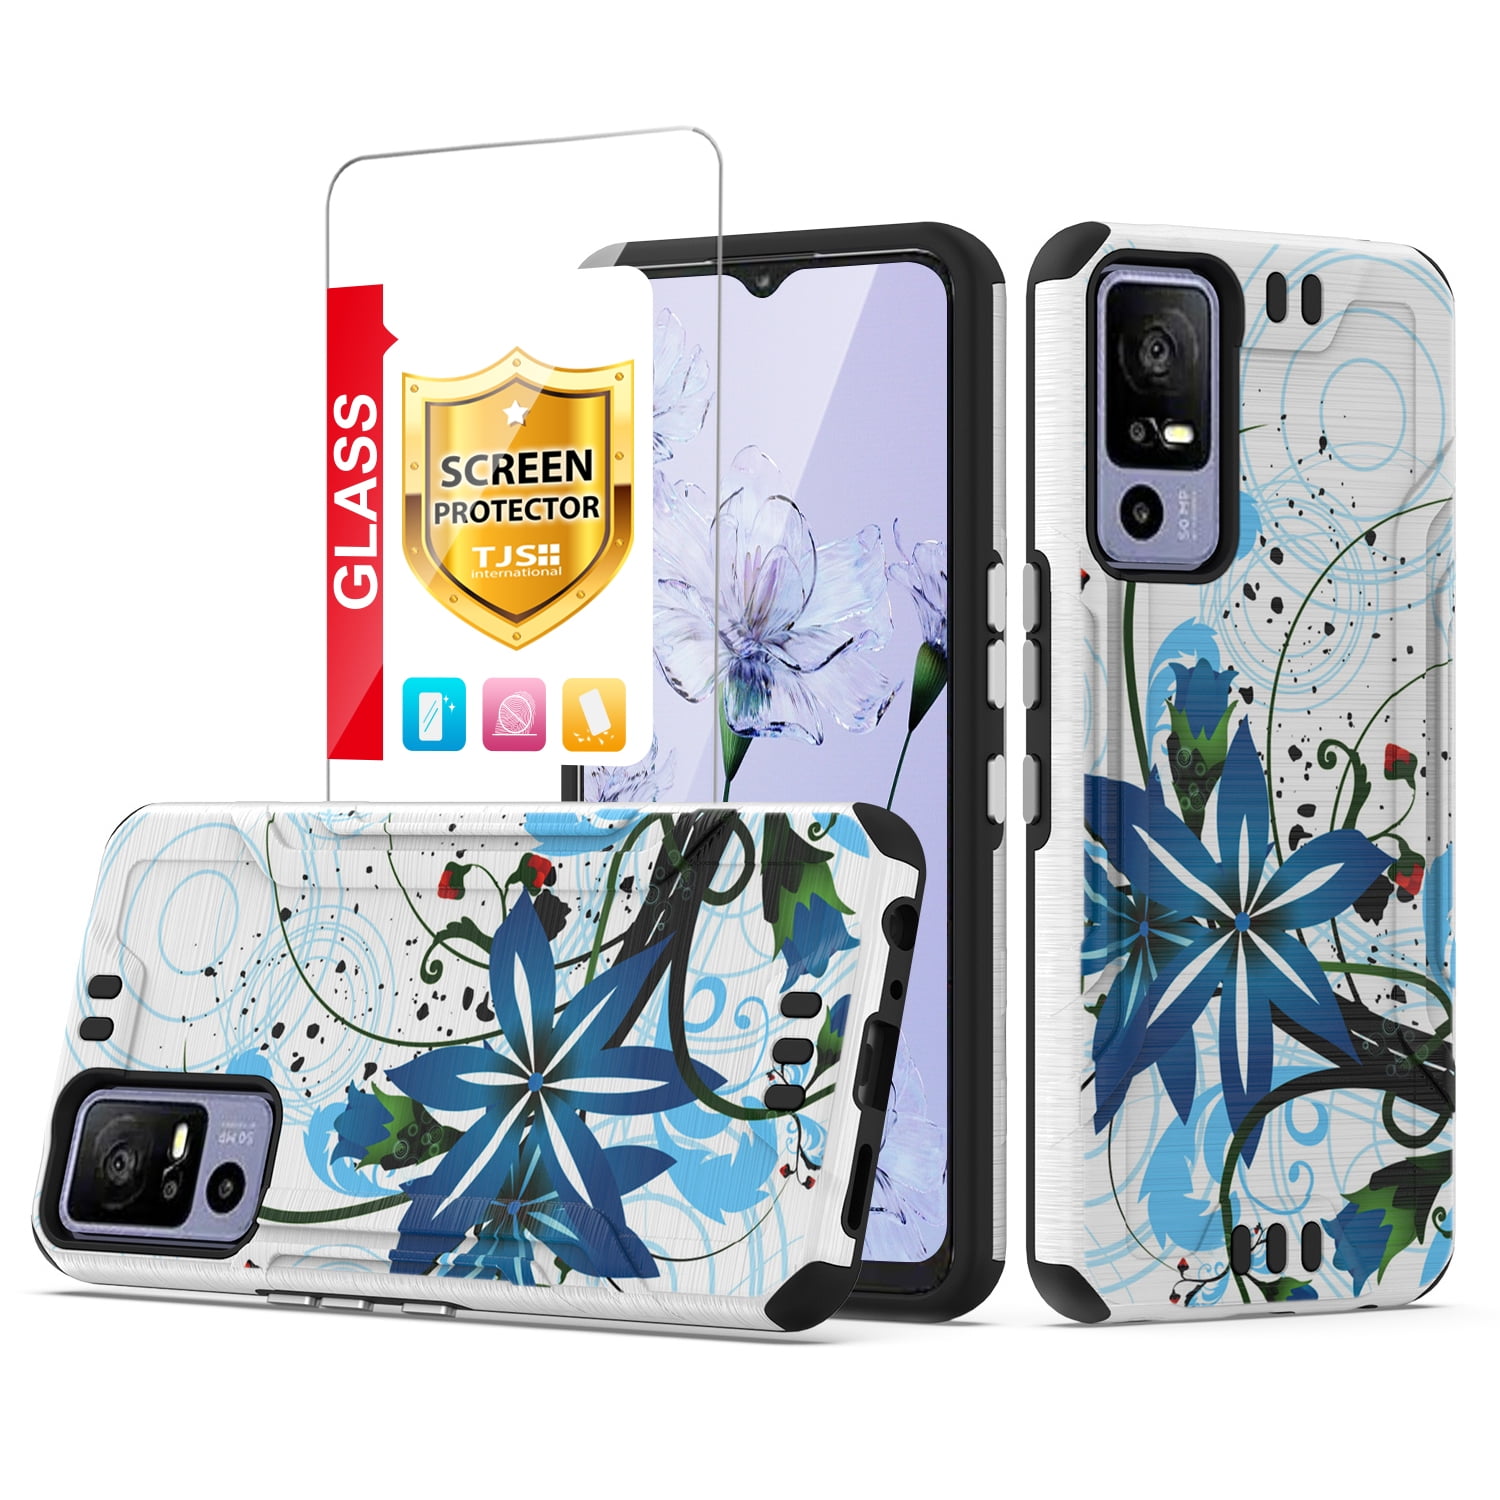  jioeuinly TCL 40 NXTPAPER 5G Case Compatible with TCL 40  NXTPAPER 5G Phone Case Cover [with Tempered Glass Screen Protector][Ring  Support][Golden Reflect Light] DJF-DJS : Cell Phones & Accessories